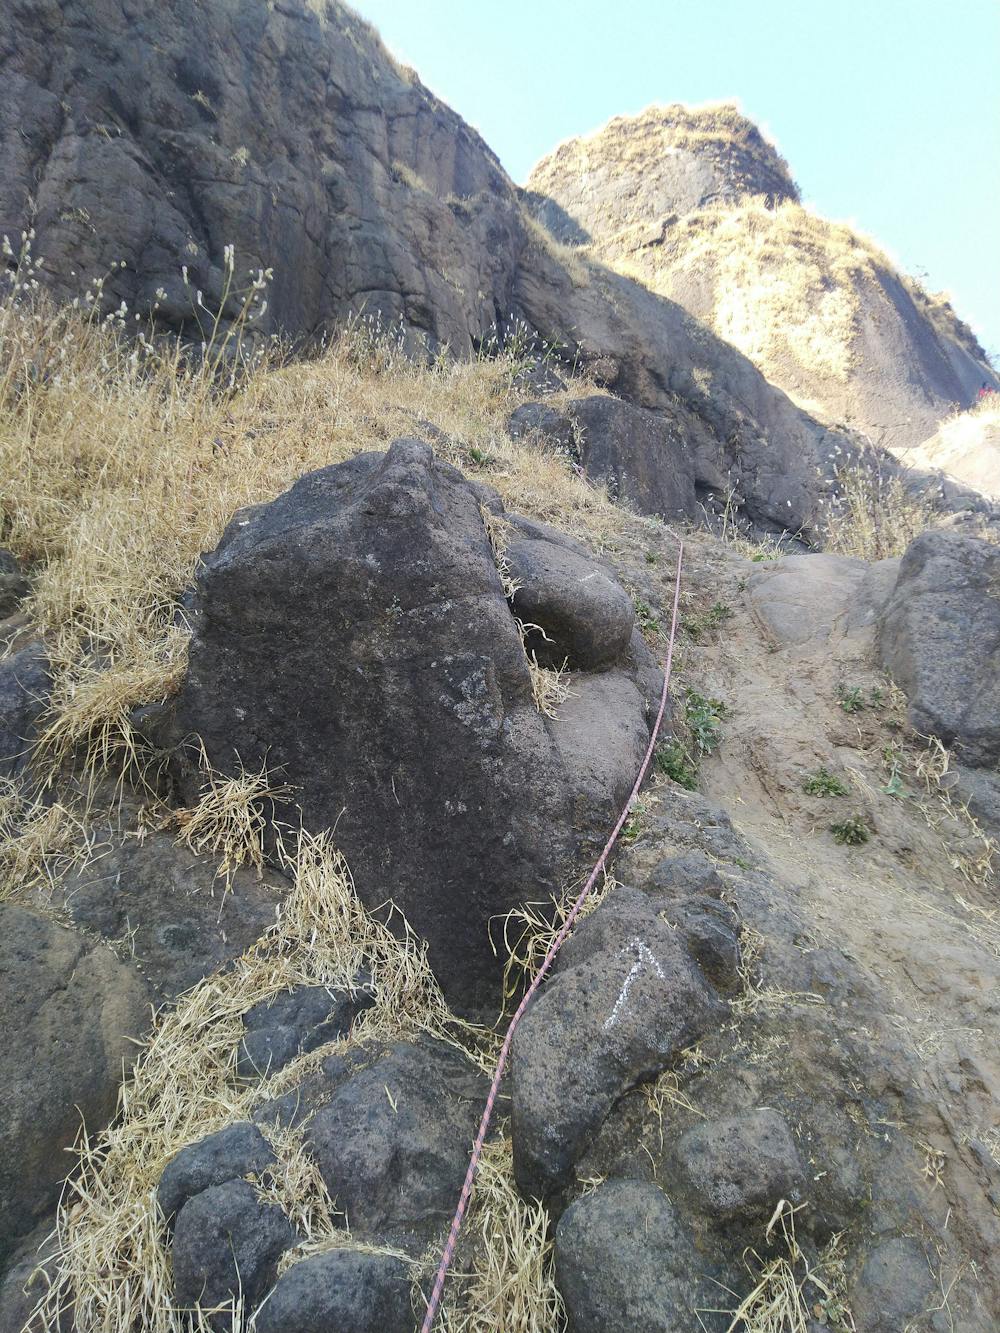 Little technical patch near budhla.Rope would ensure safety, the route is 4c+ or less difficulty for climbing but the exposure is about 300m vertical.